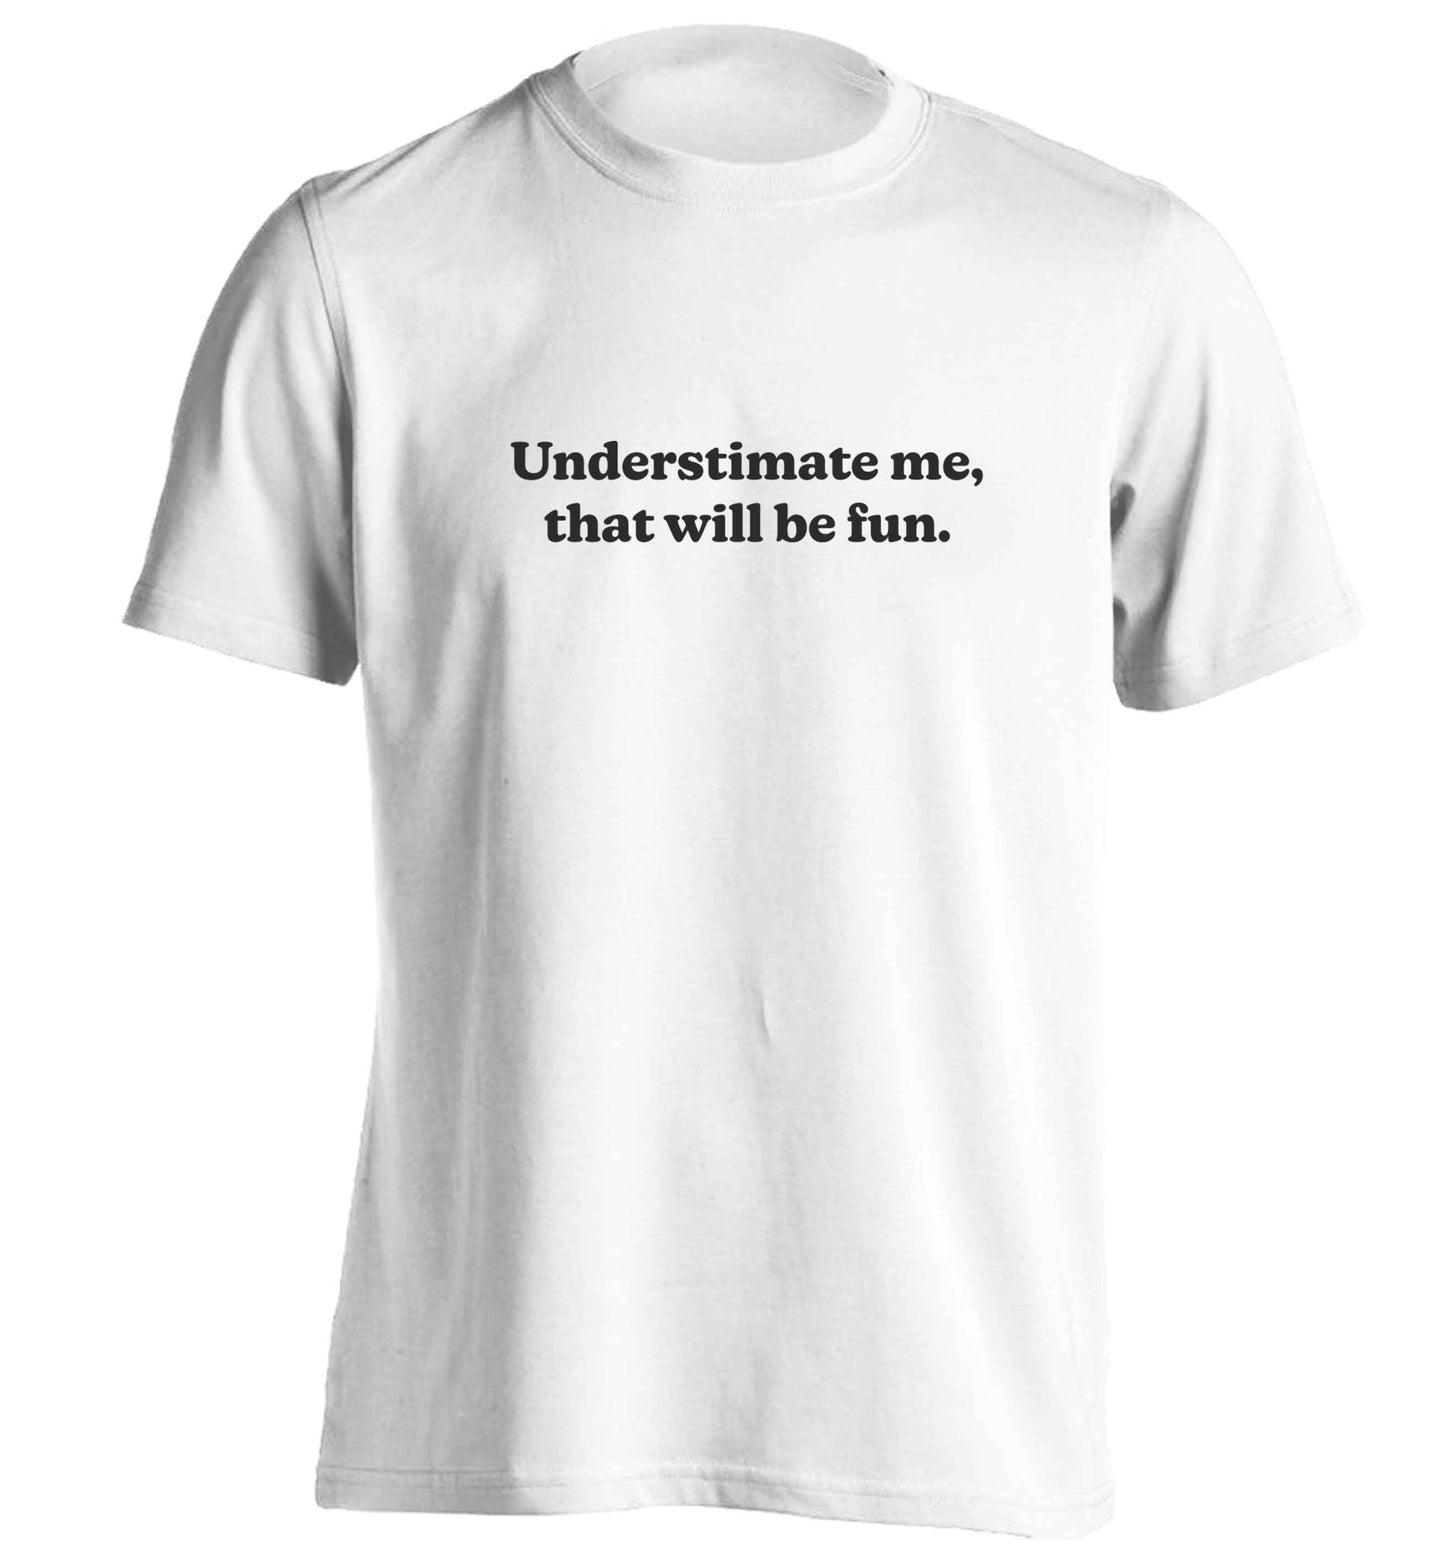 Underestimate me that will be fun adults unisex white Tshirt 2XL